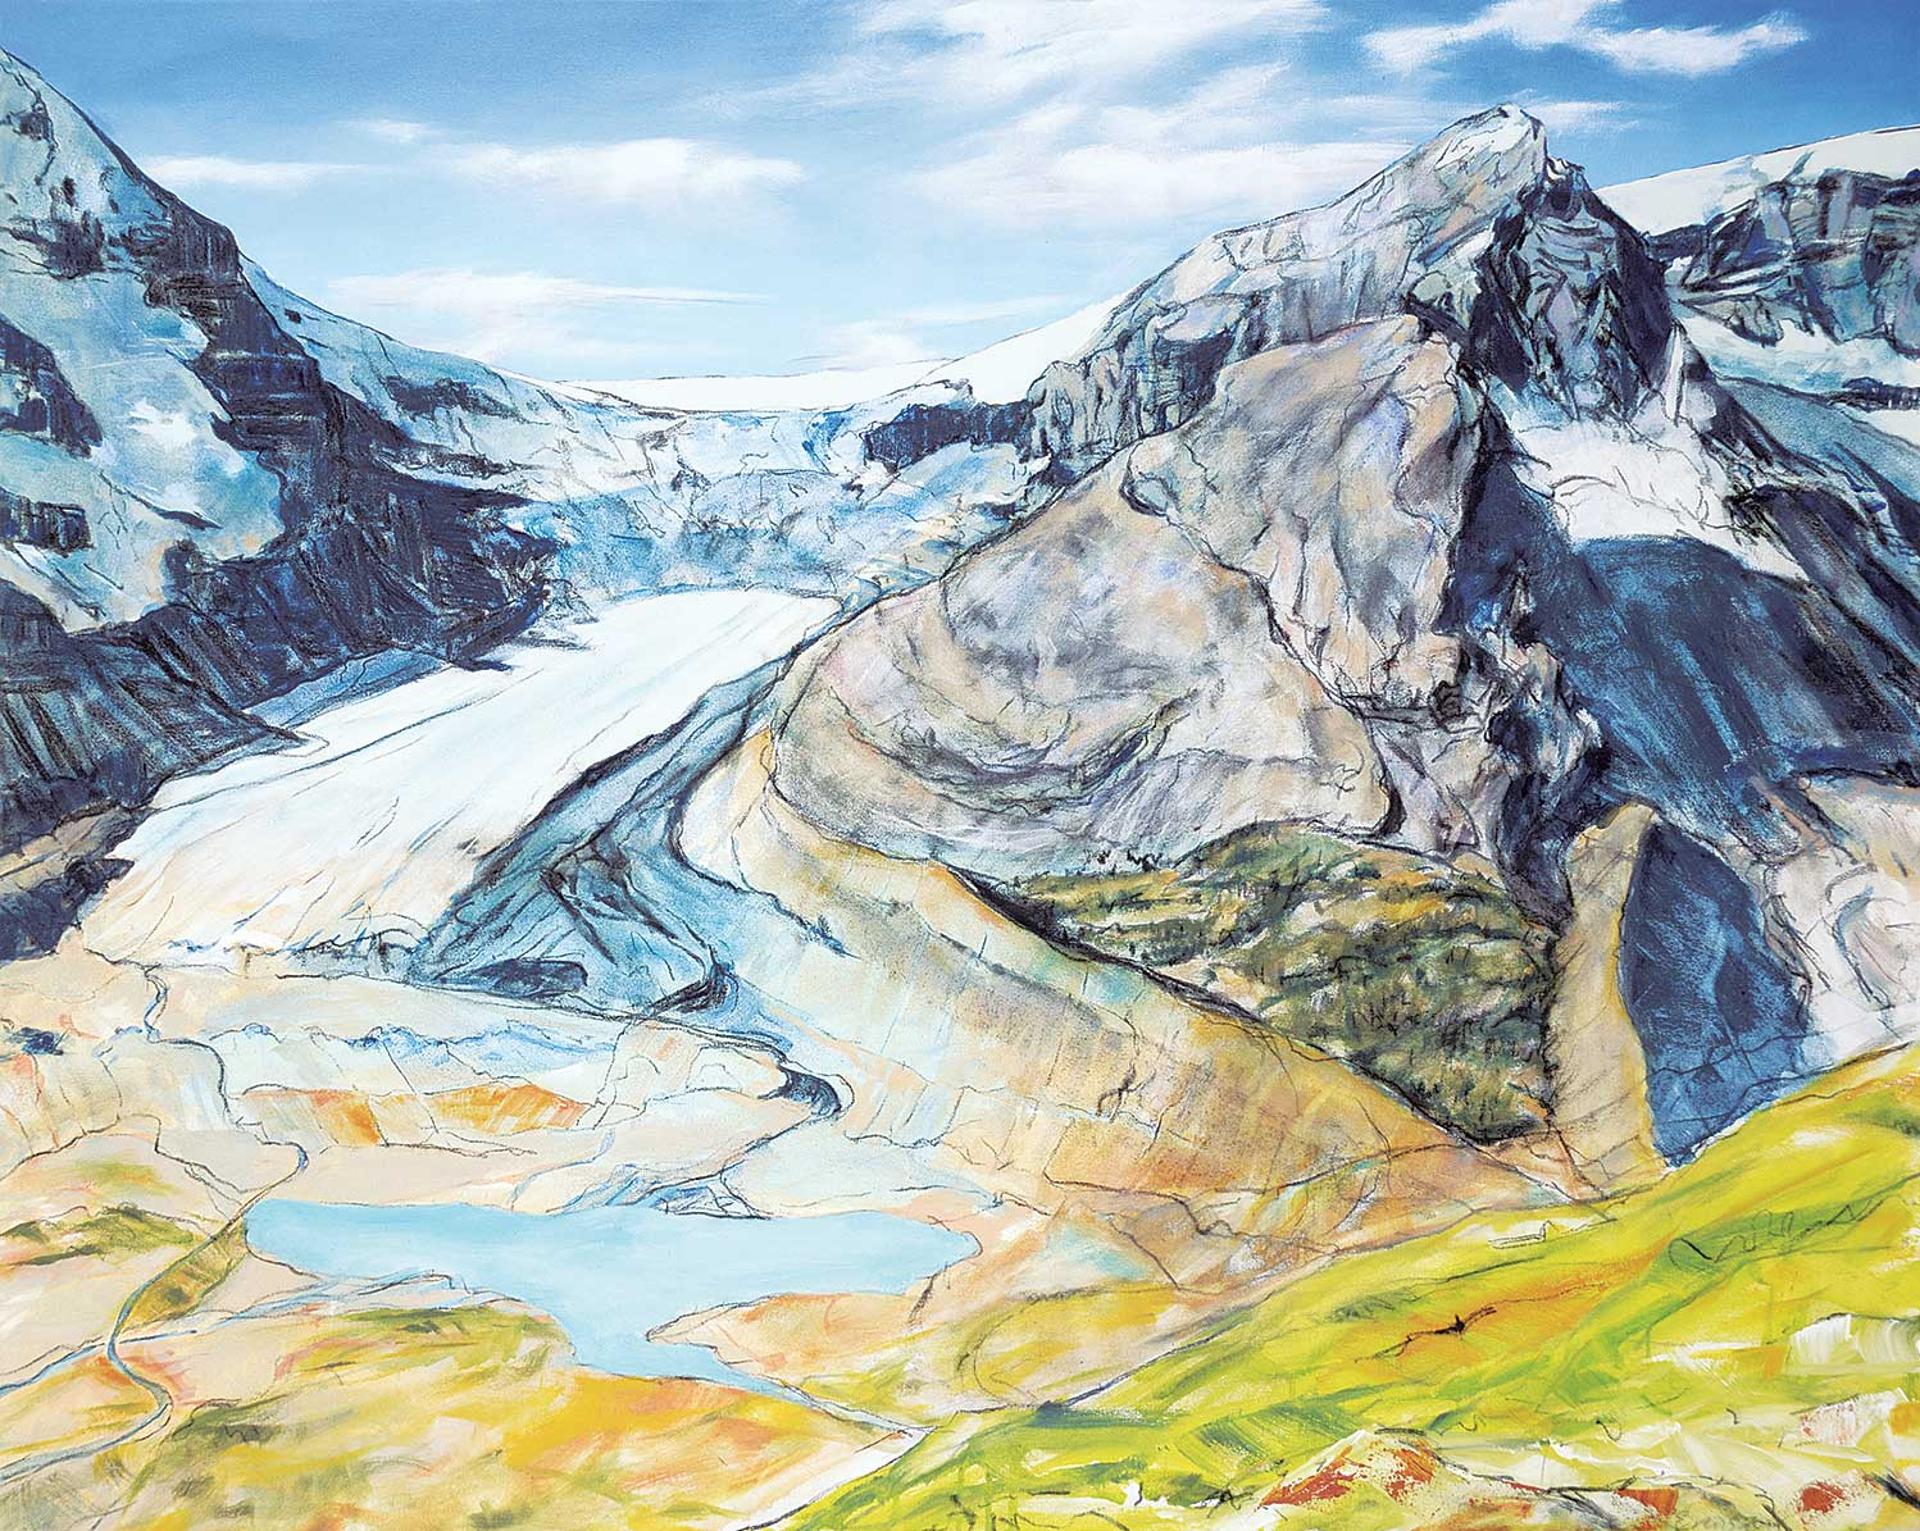 Maureen Enns (1949) - The Columbia Icefields